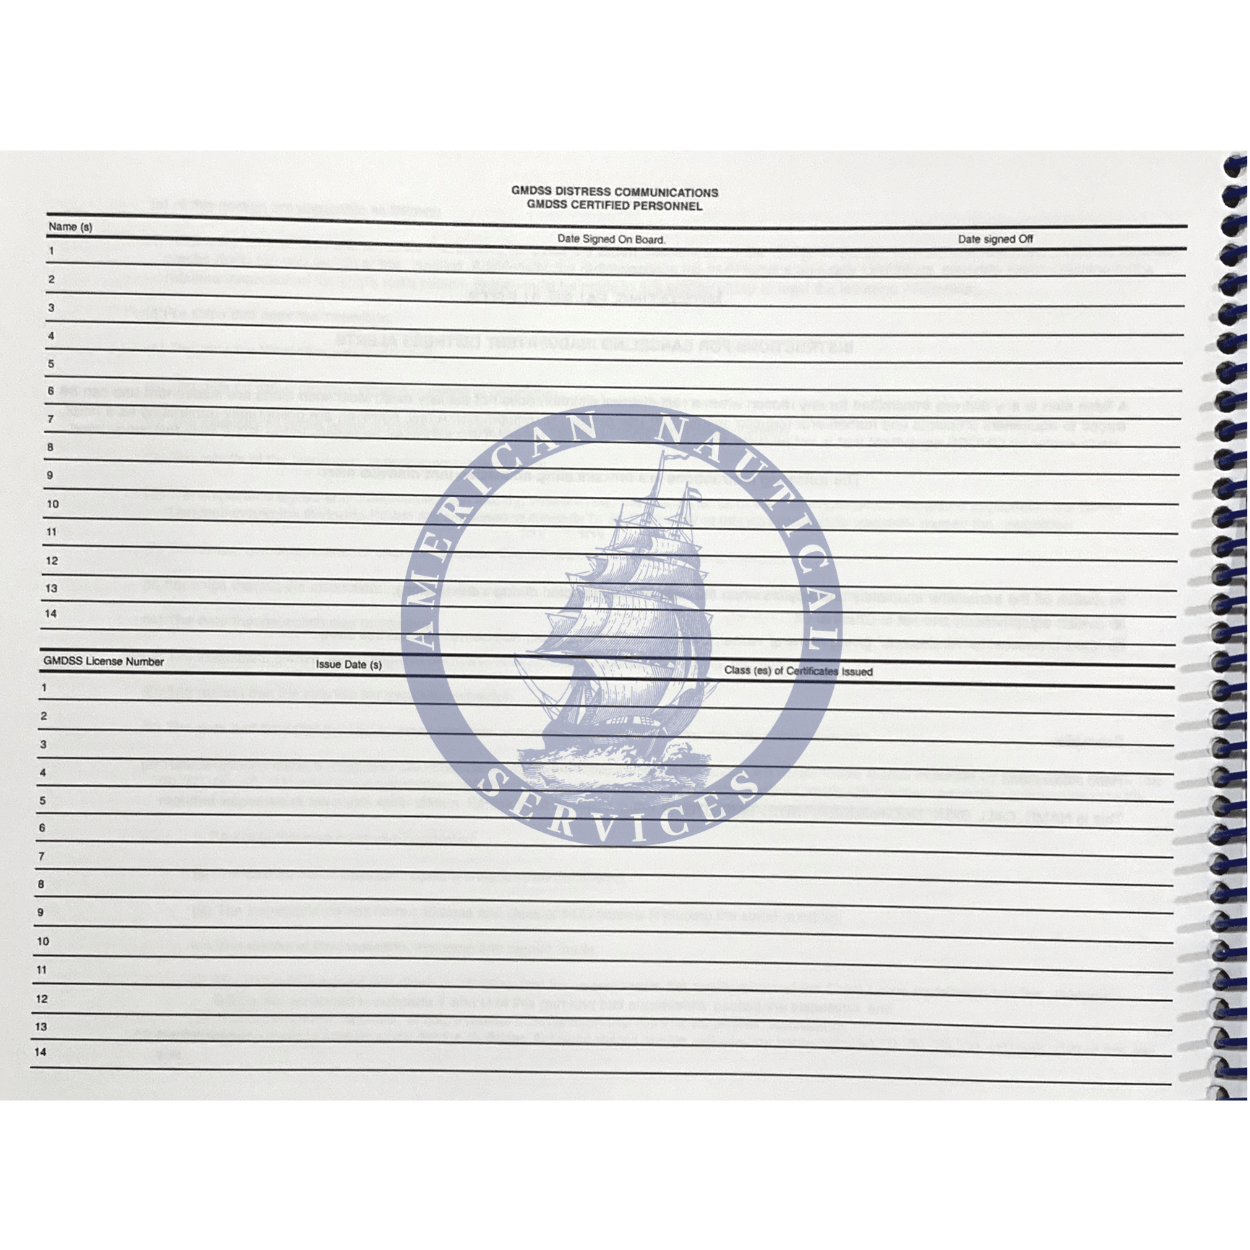 GMDSS Global Maritime Distress and Safety System Log Book (96 Days)